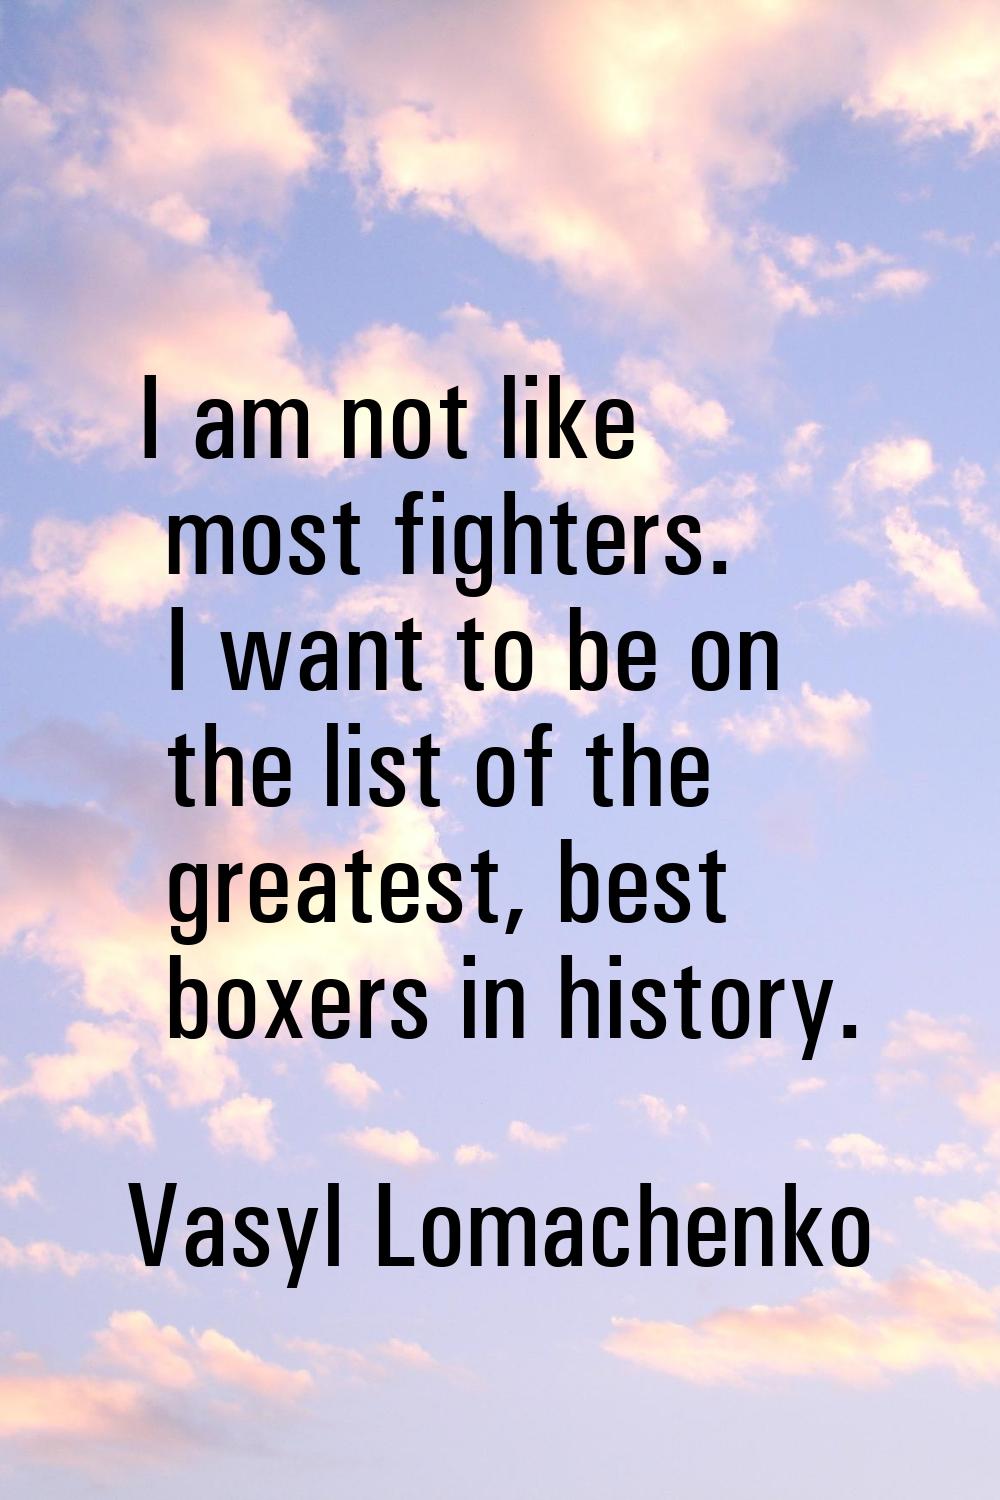 I am not like most fighters. I want to be on the list of the greatest, best boxers in history.